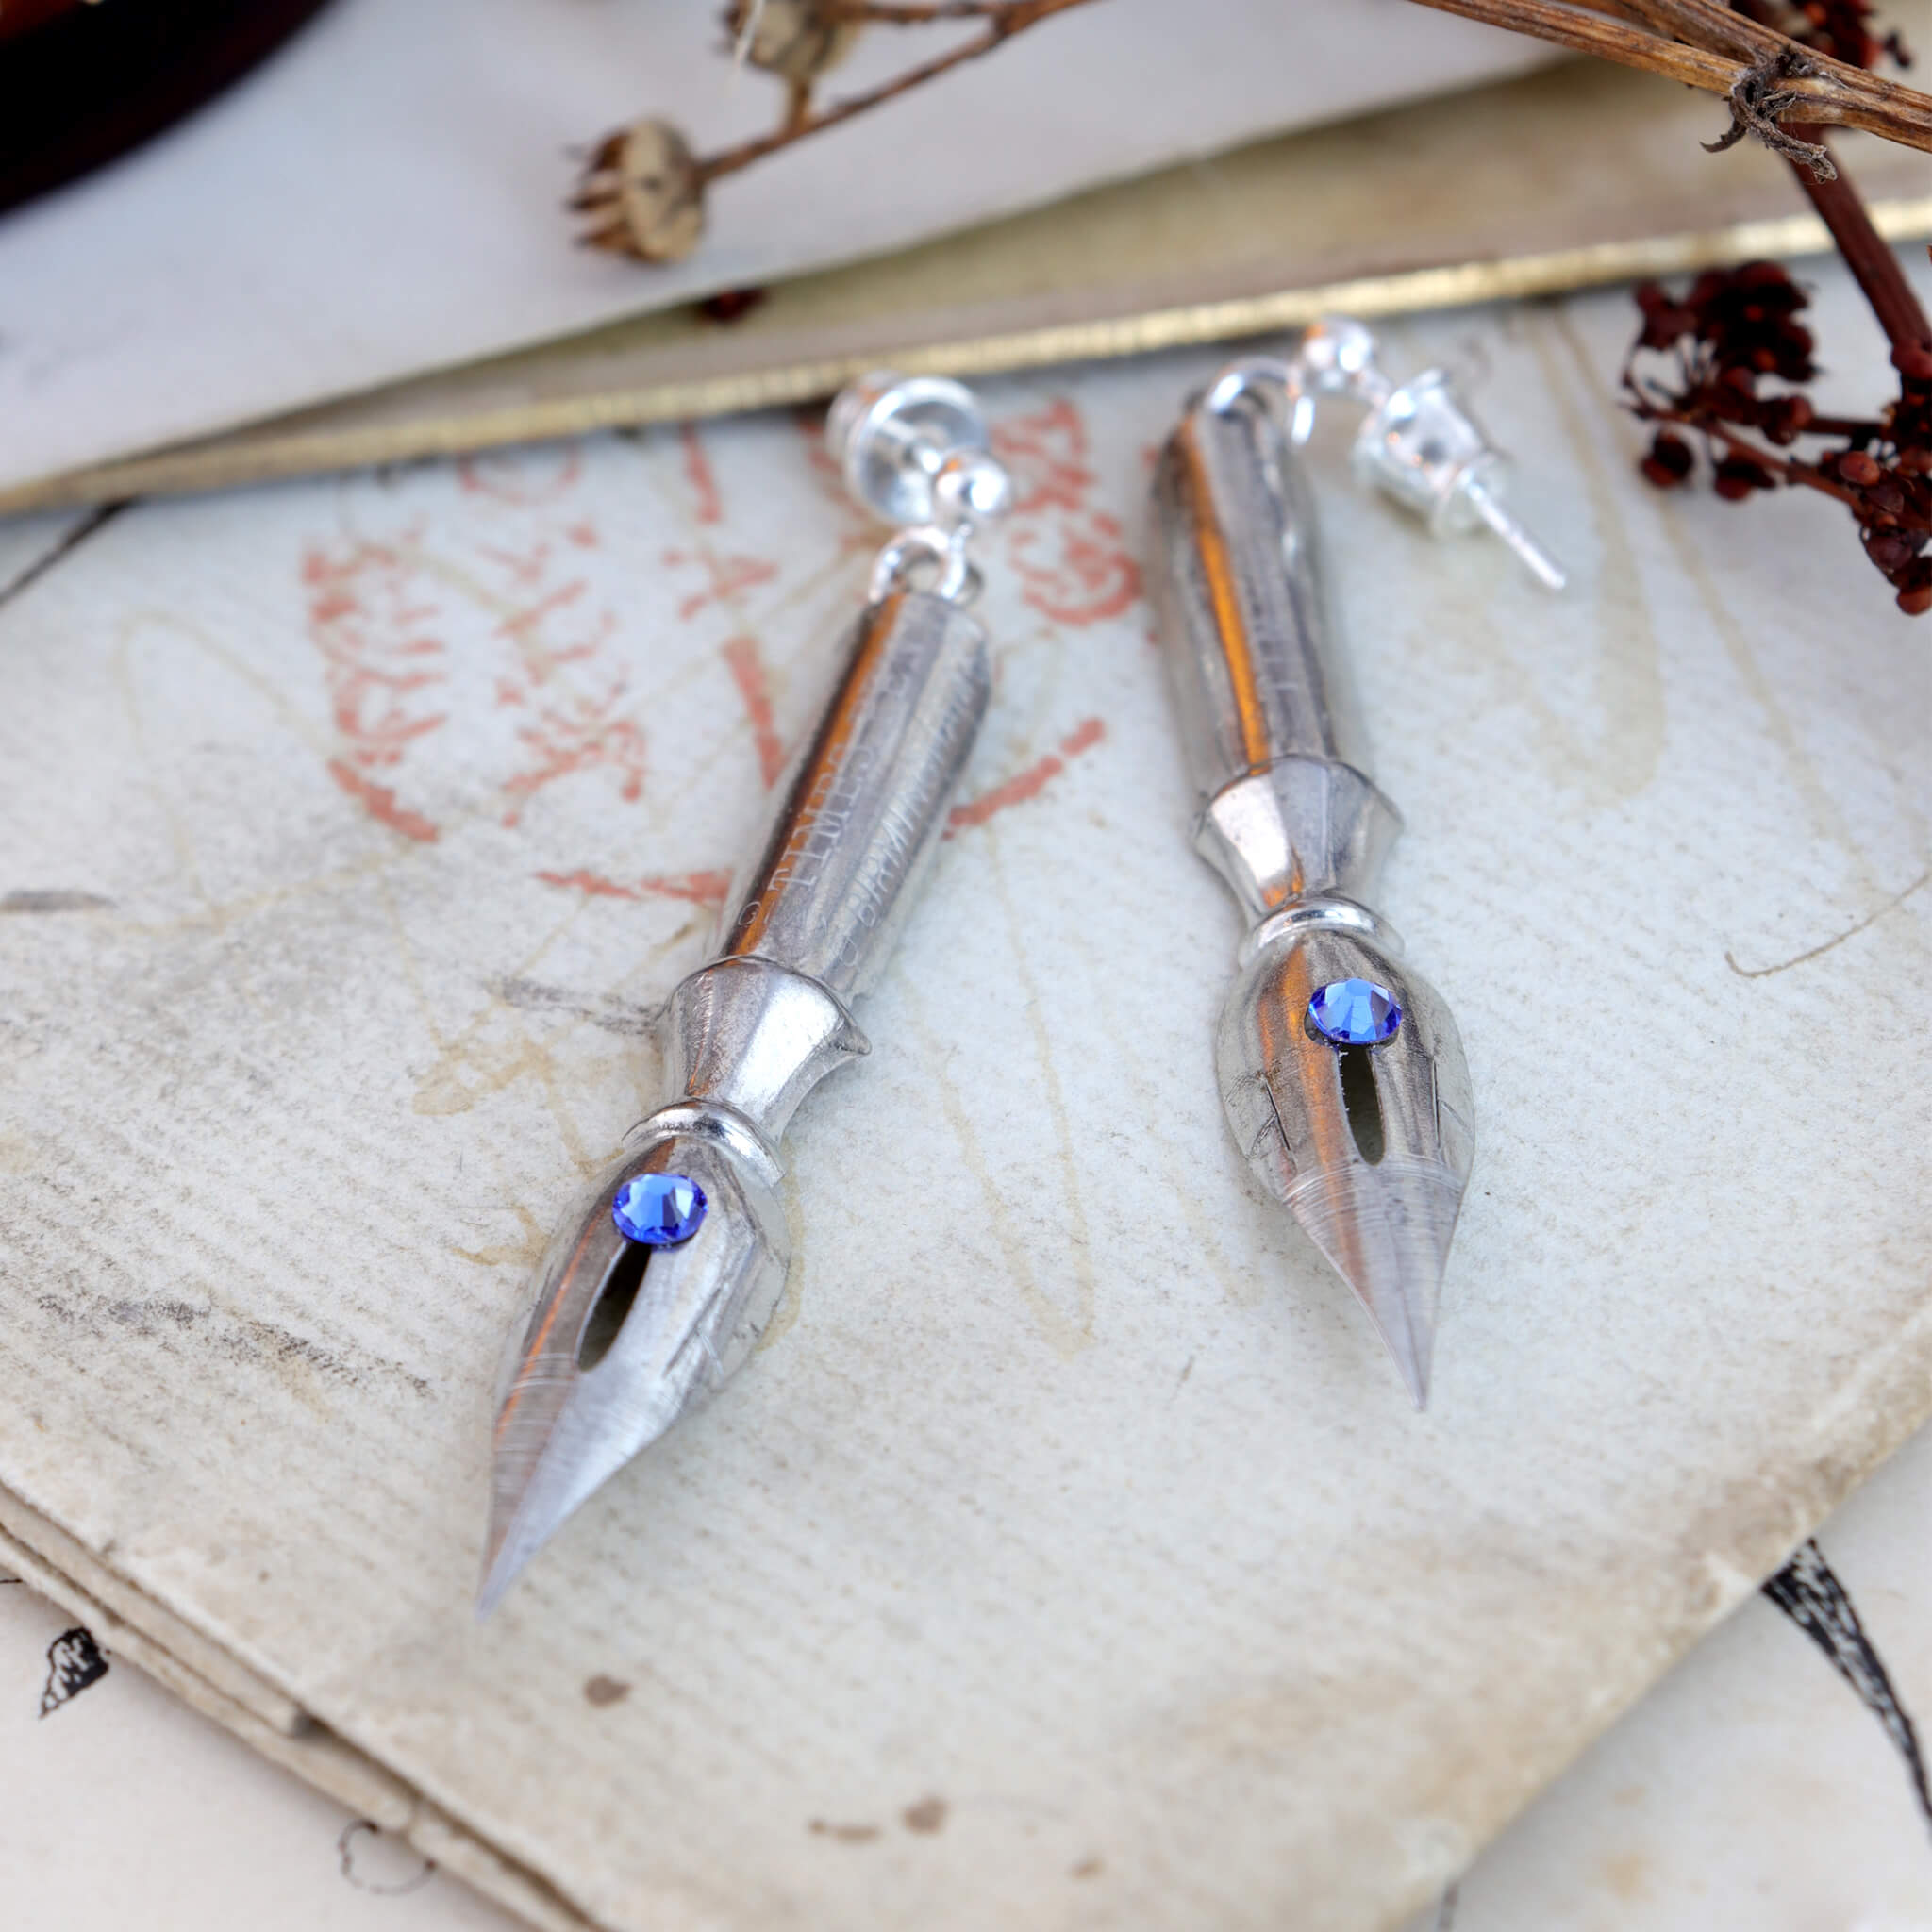 pen nib earrings with sapphire birthstone crystals on them lying on vintage paper